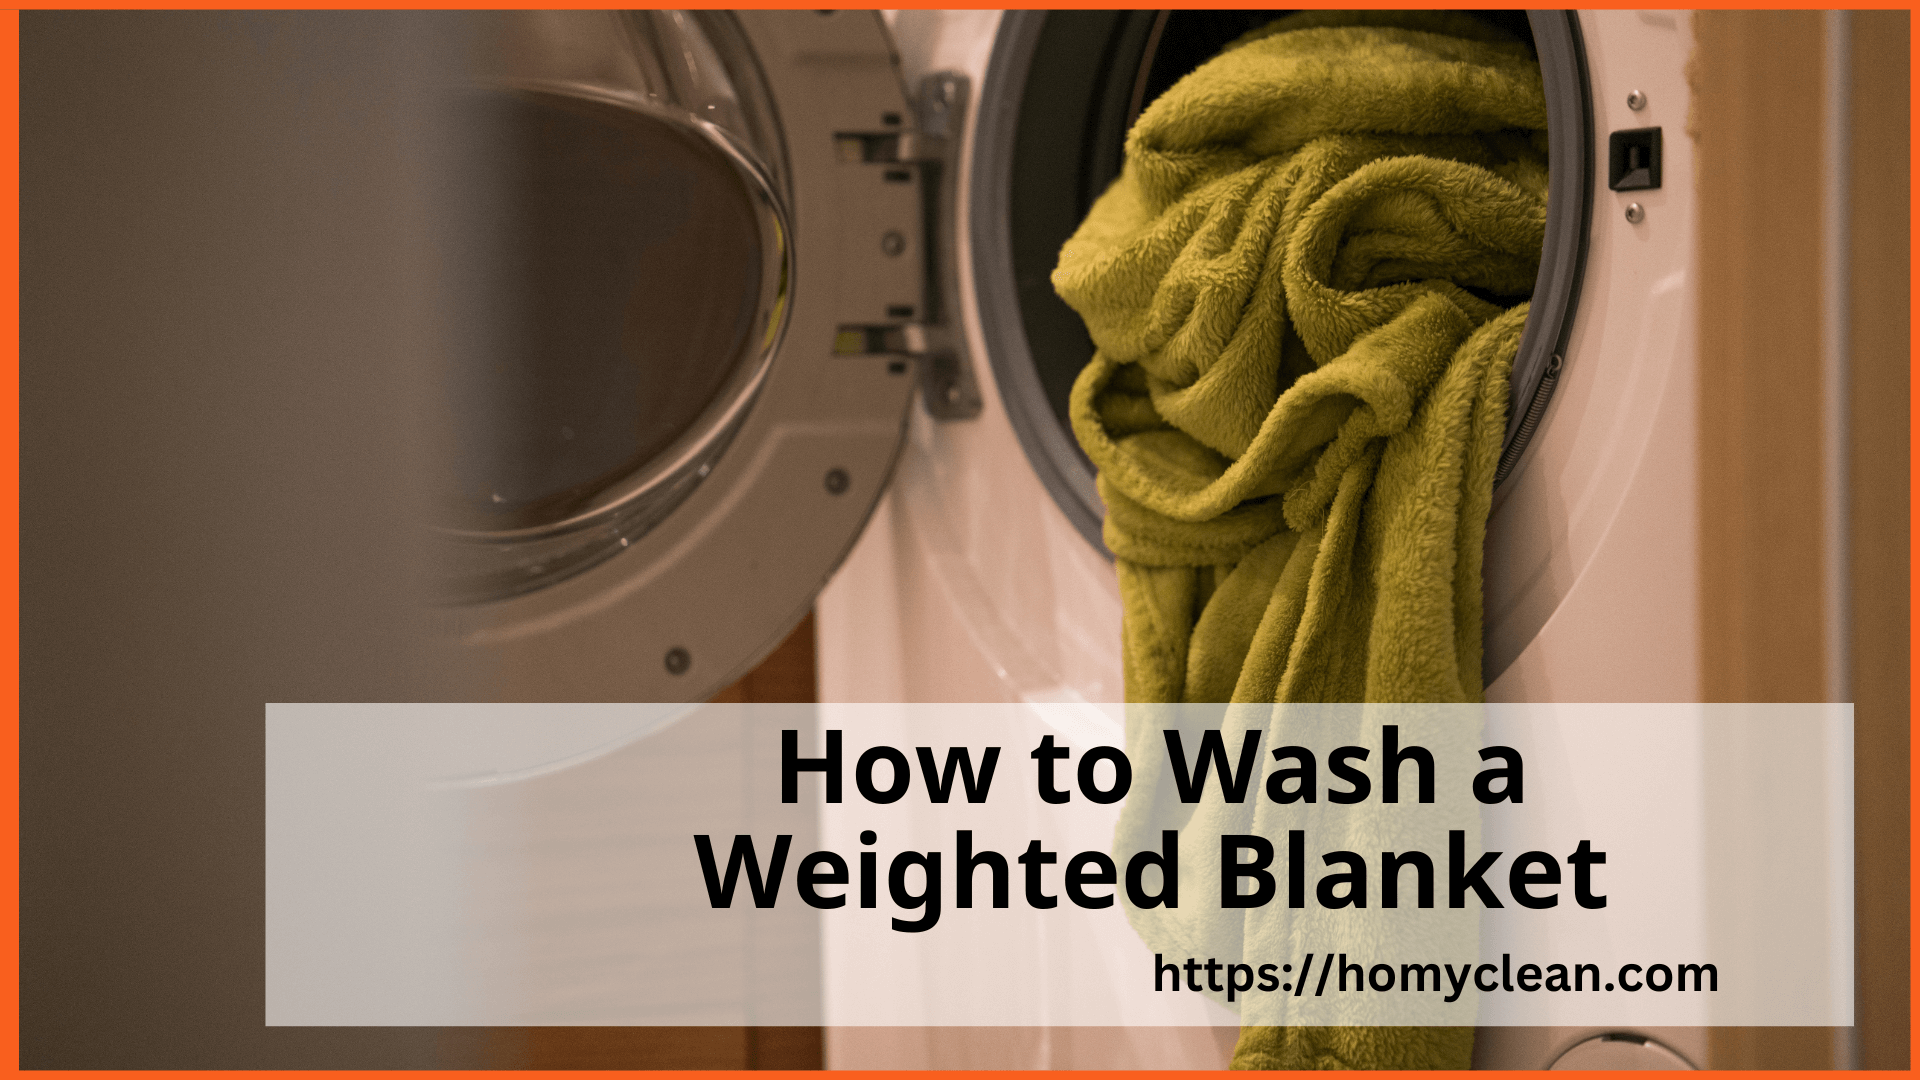 How to Wash a Weighted Blanket without Damaging It